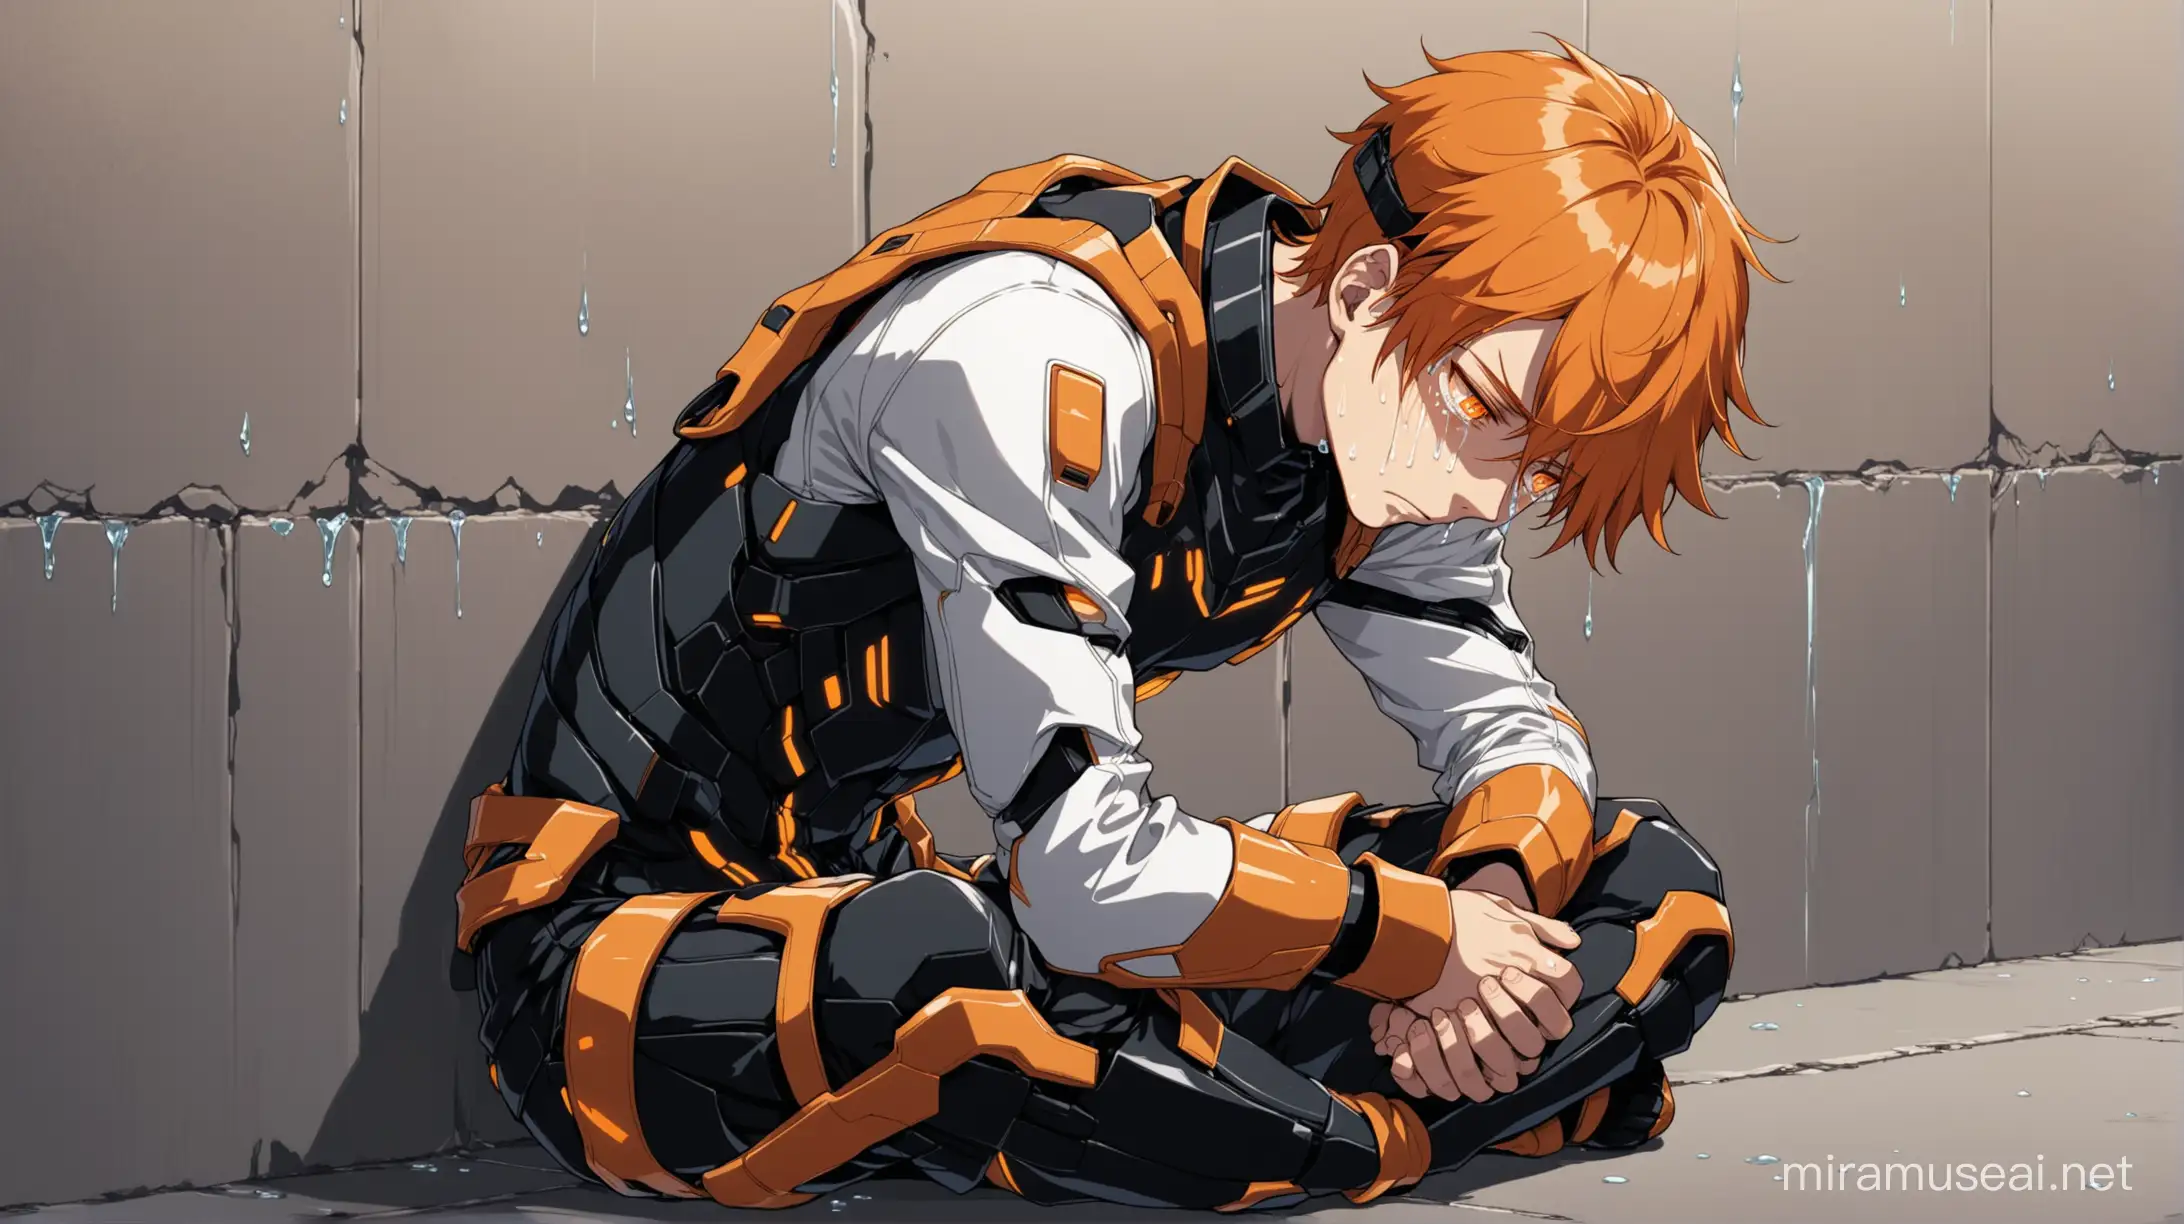 Anime Boy Character Sitting on Floor Crying Hands Tied Futuristic Orangeheaded Character in Distress